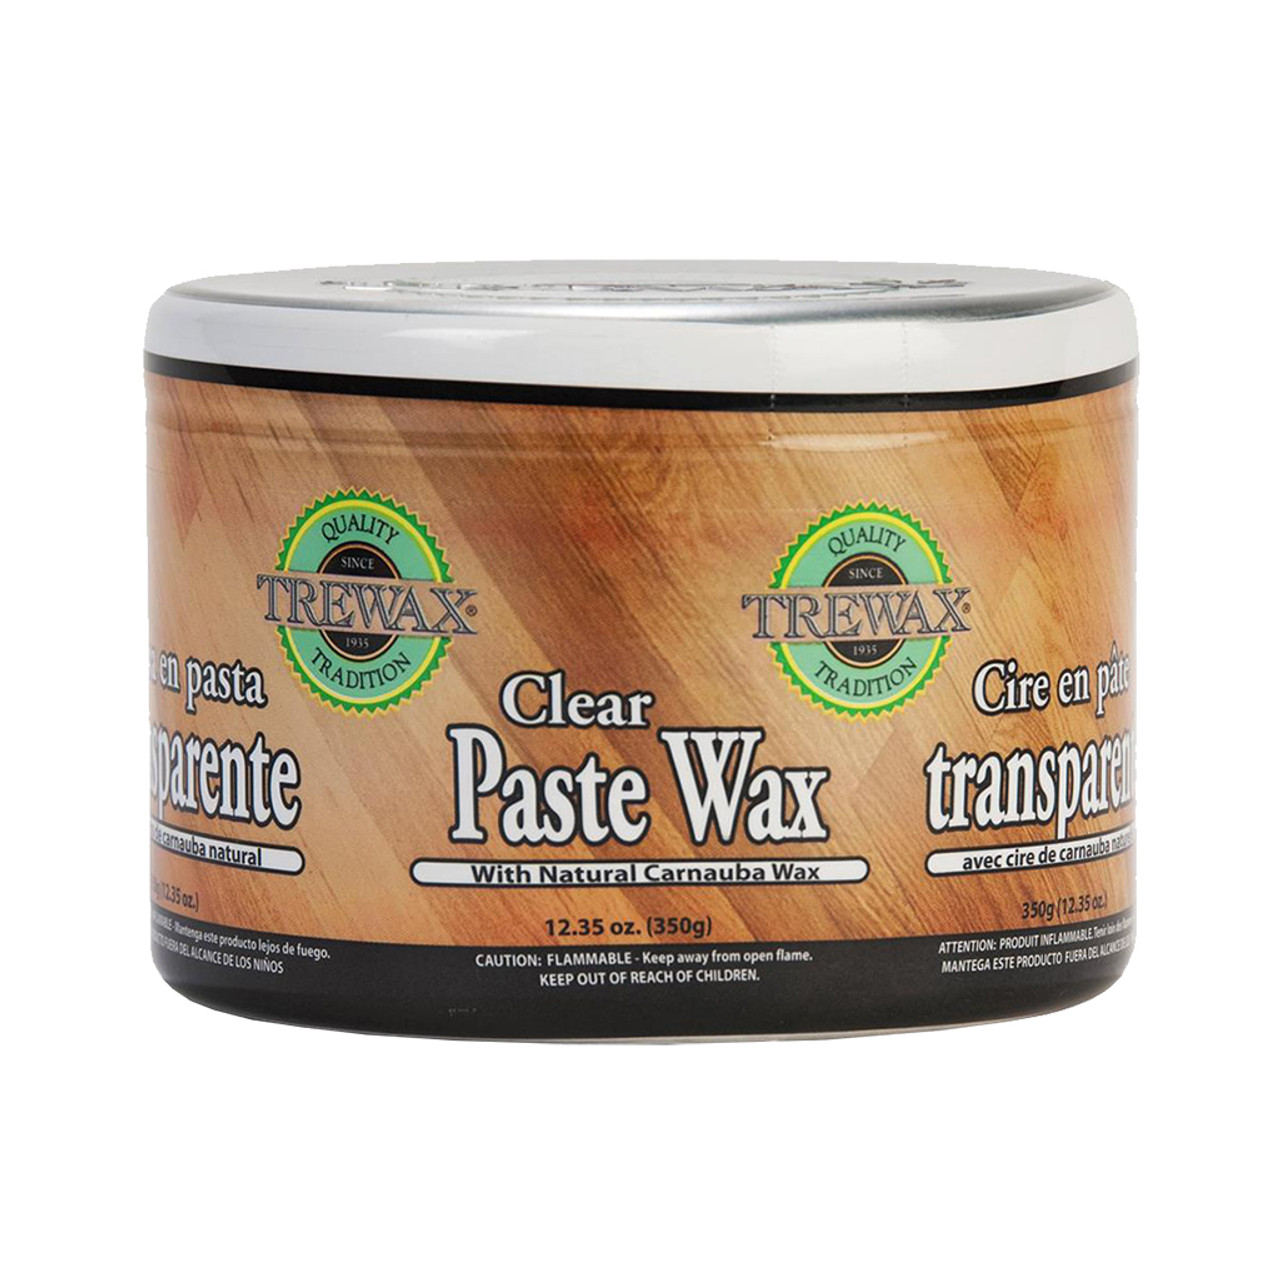 Trewax Clear Paste Wax - Midwest Technology Products